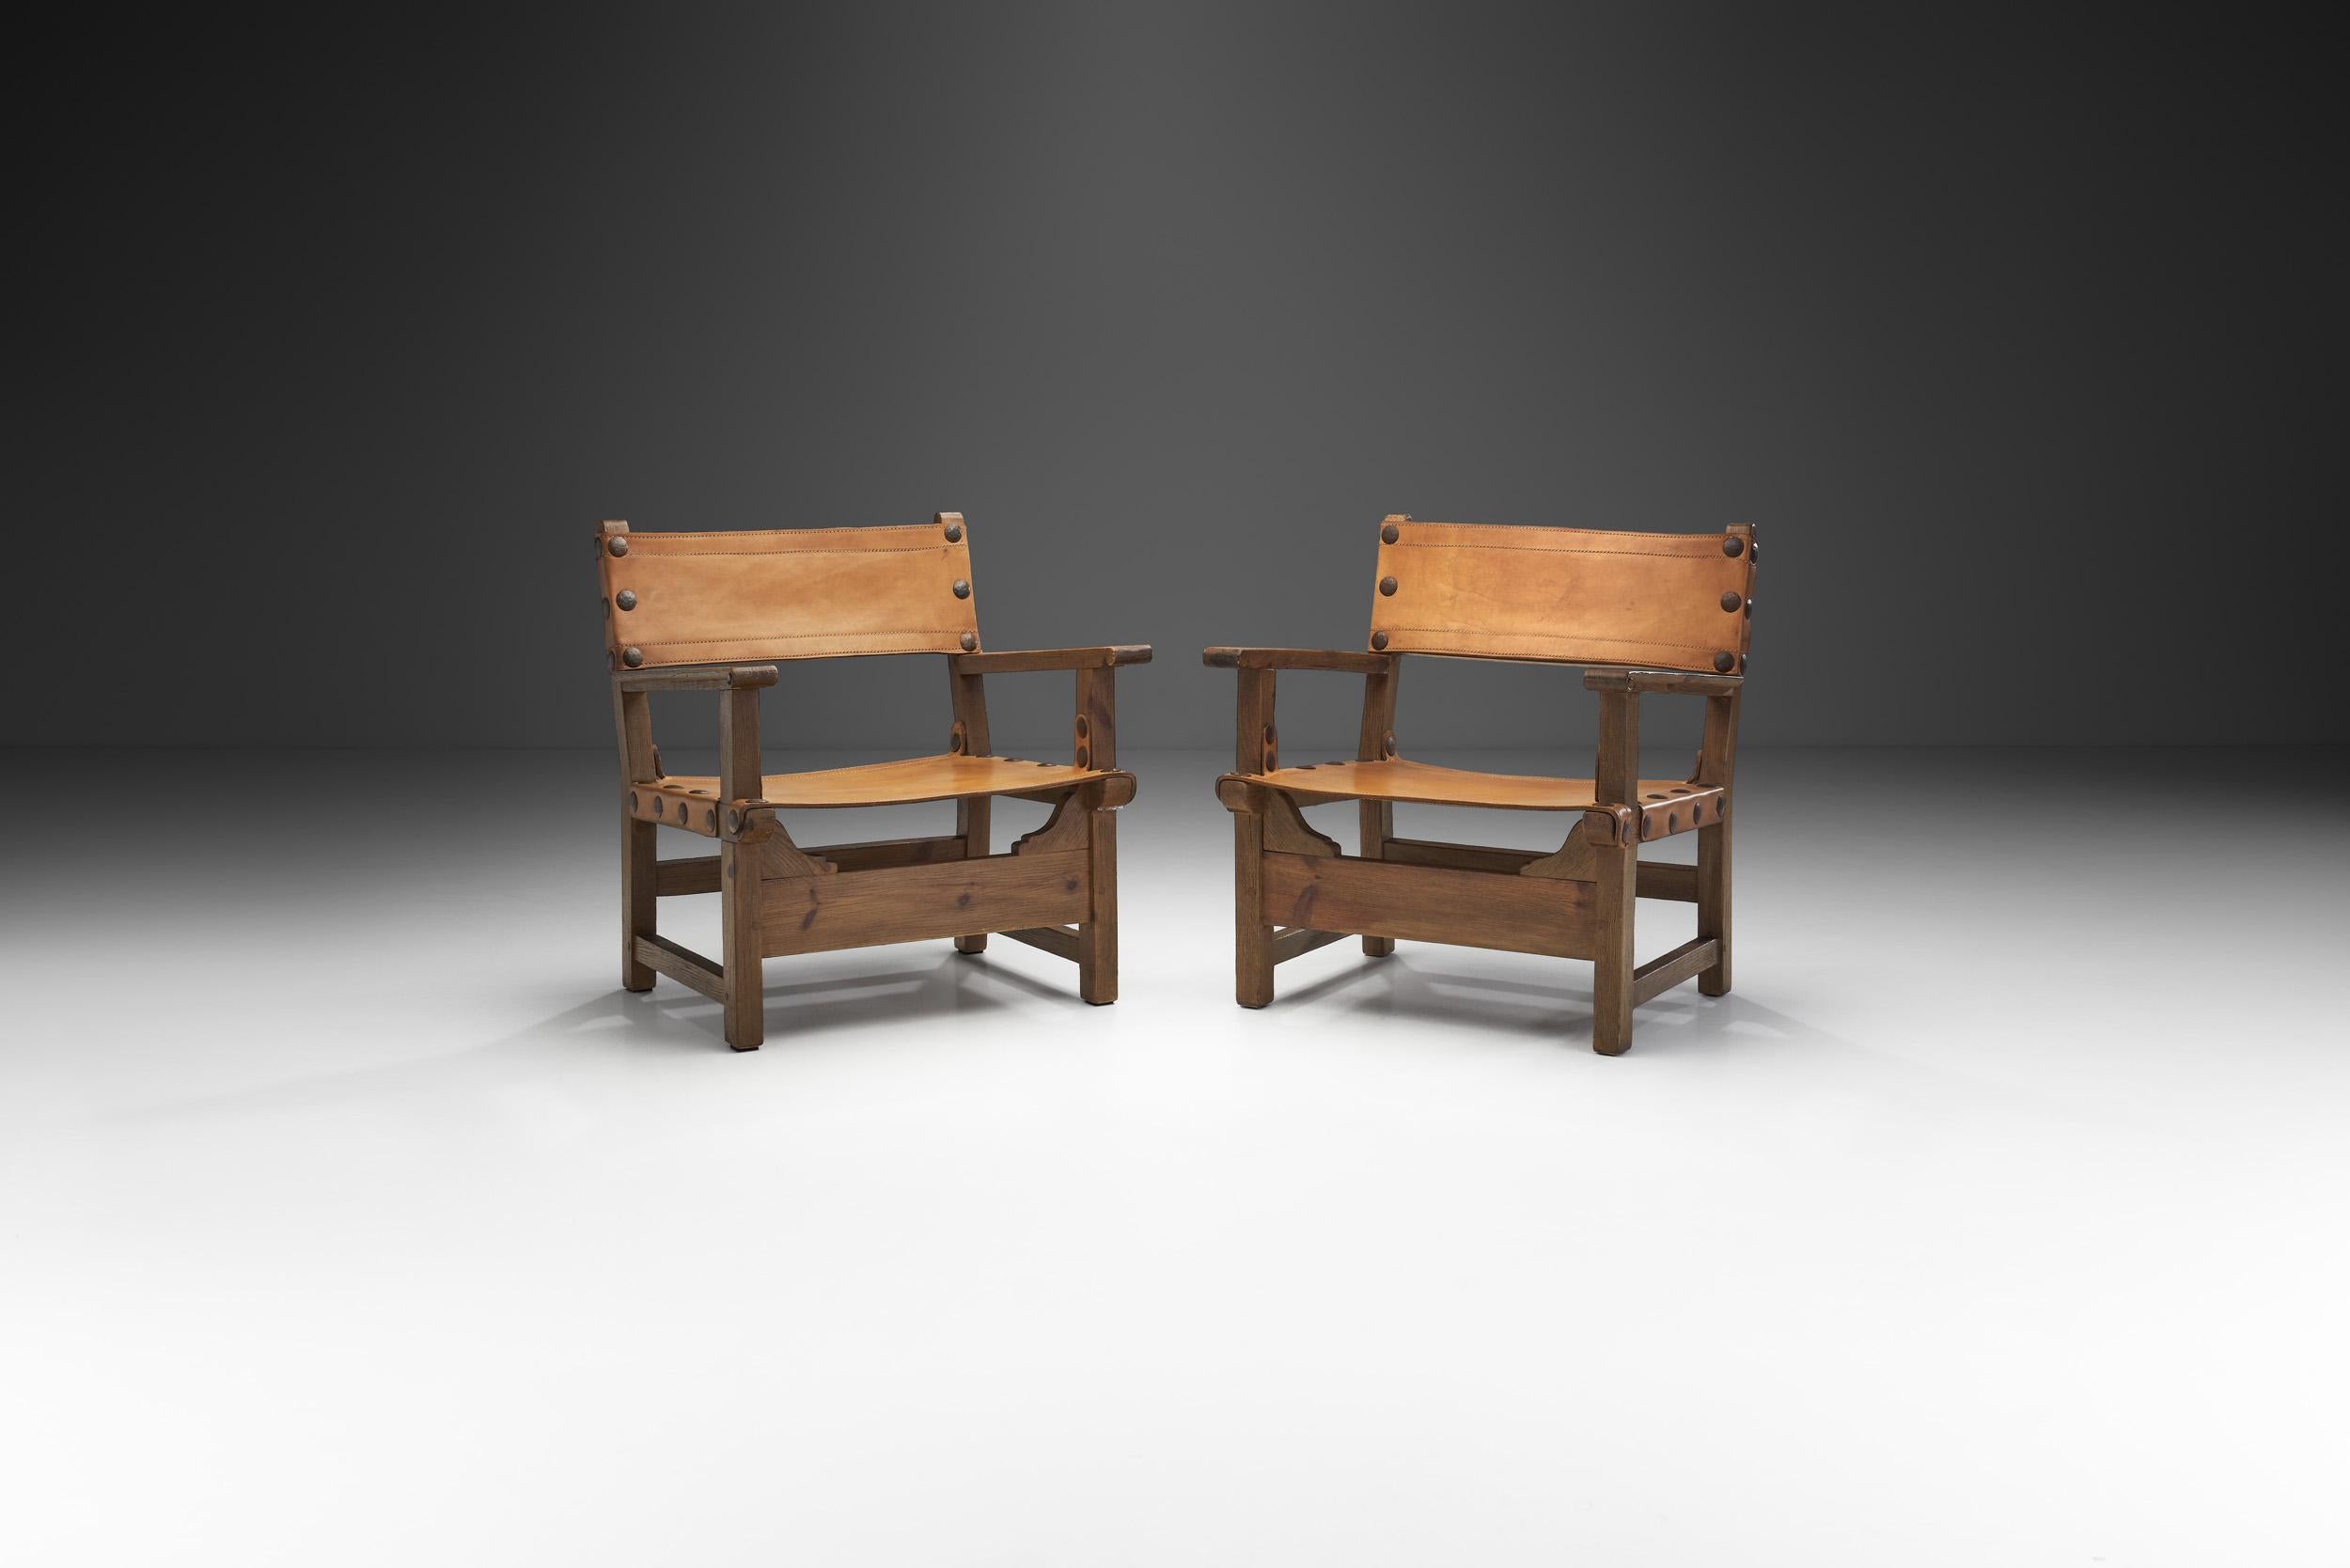 This pair of chairs might seem bold and rugged at first glance, however, at closer inspection, it is clear that the design is very well-thought-out; the lines are precisely sculpted, and the joinery precise and tight.

These so-called “Spanish